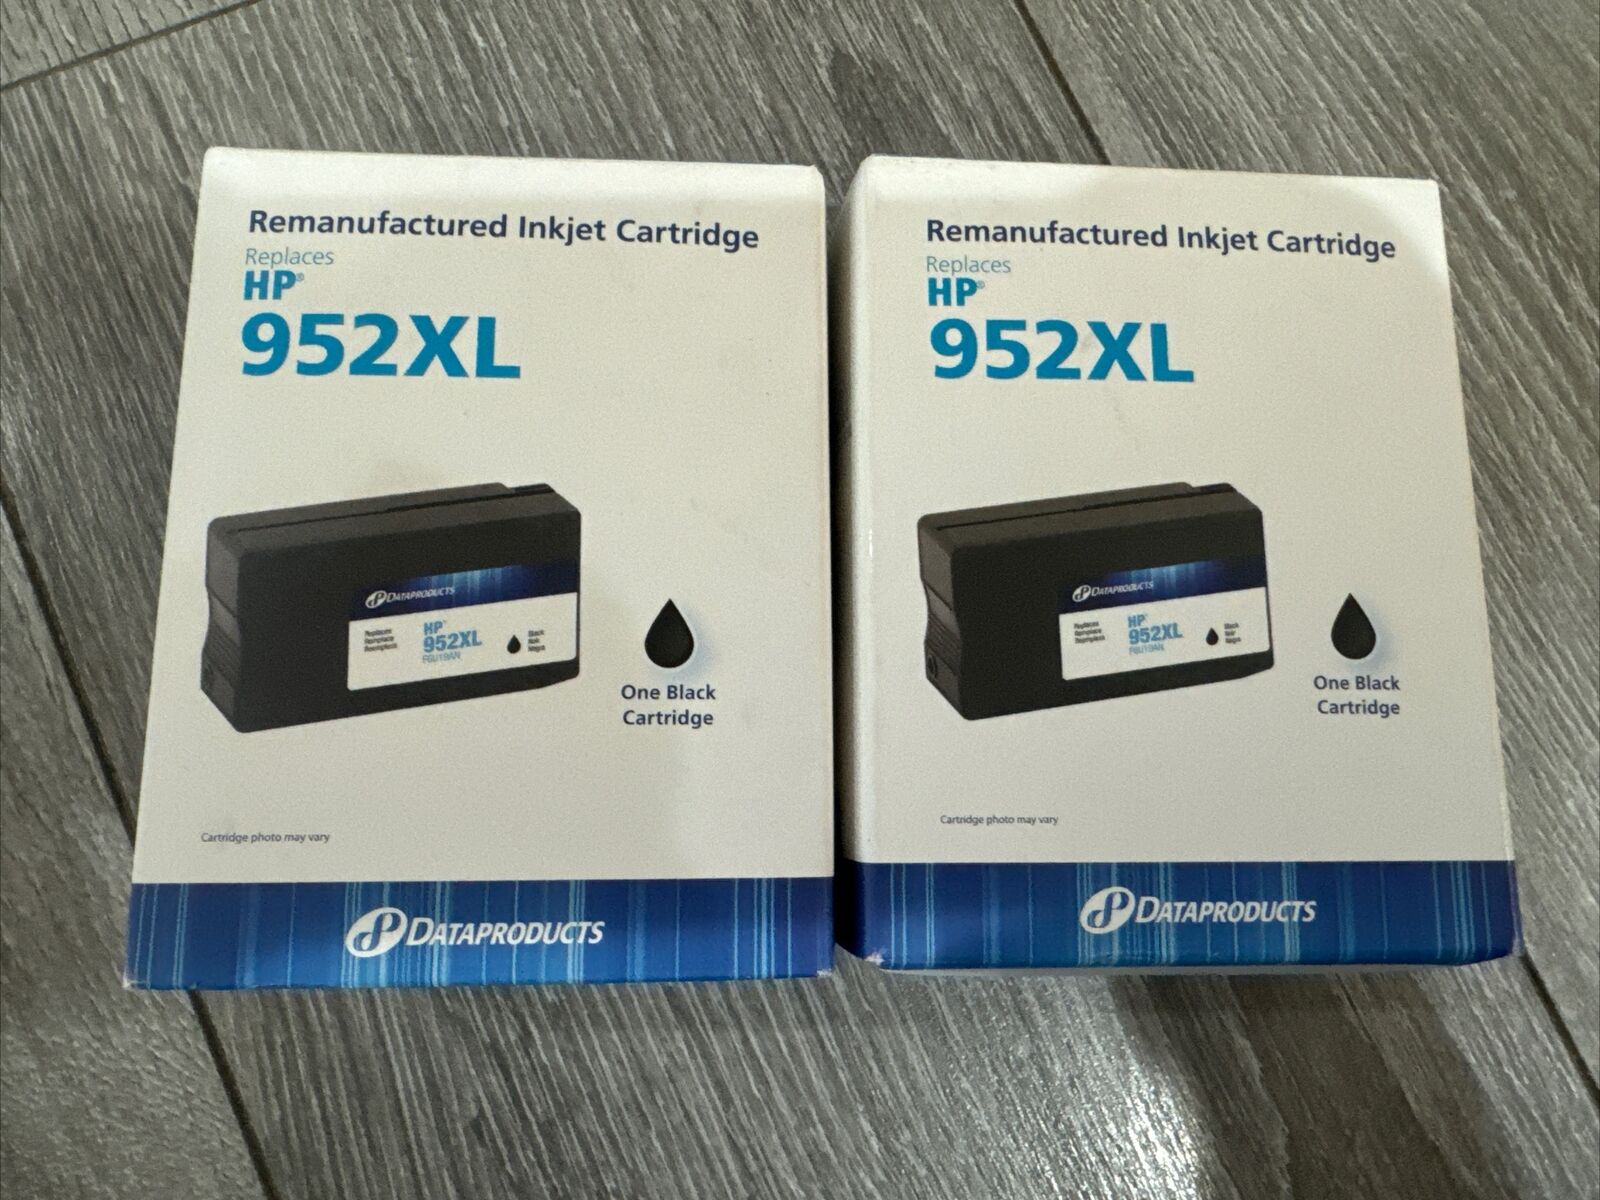 Lot of 2 - Dataproducts High Yield Black Ink Cartridge Compatible with HP 952XL